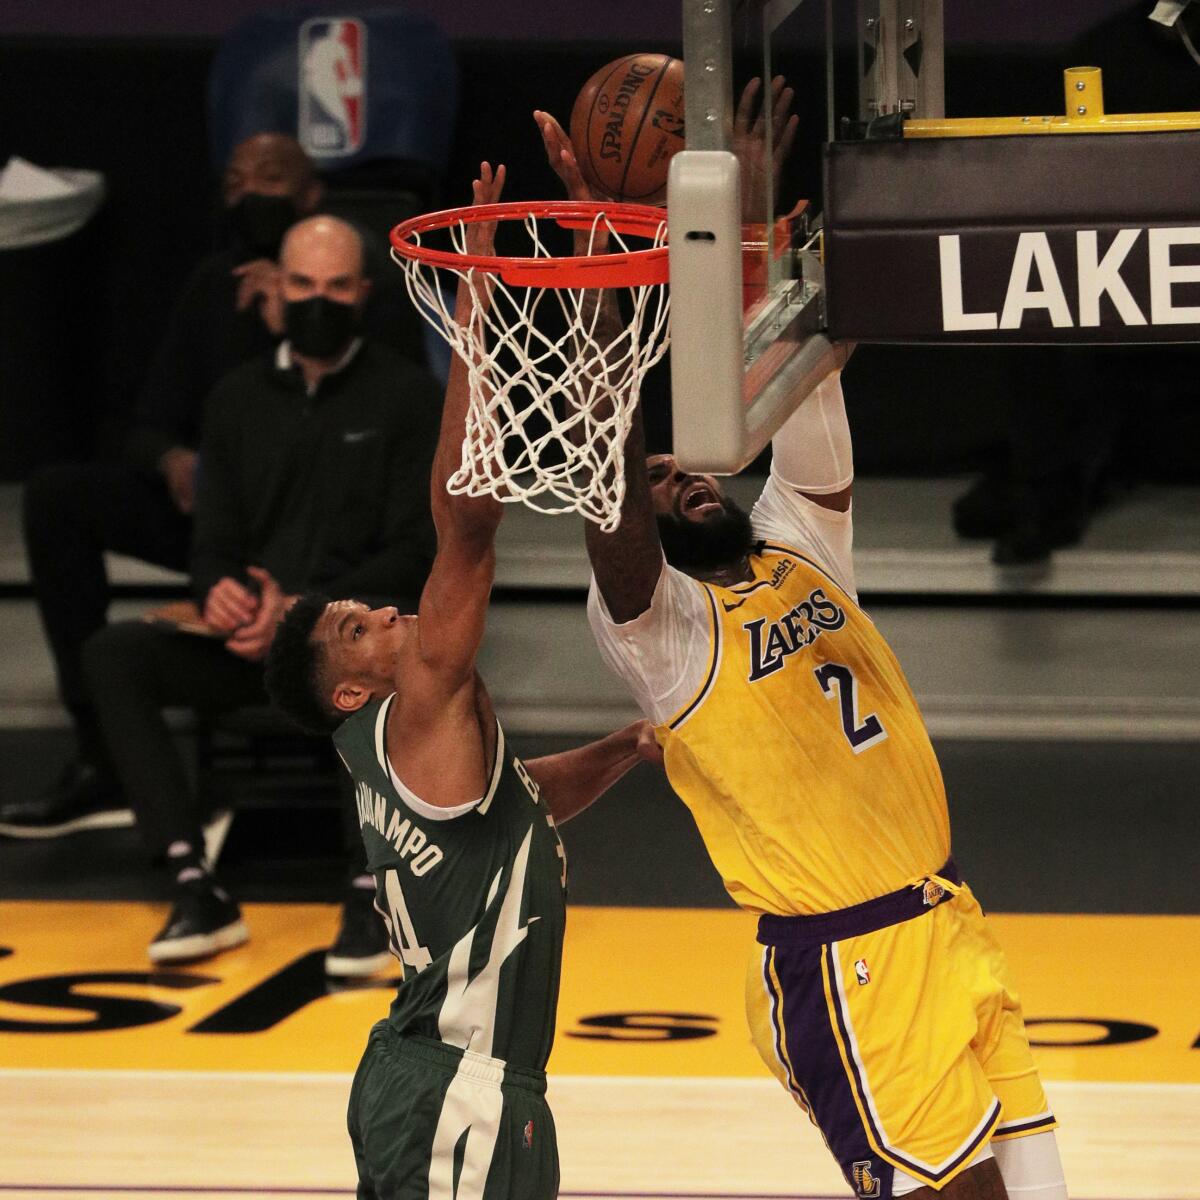 Lakers Andre Drummond drives to the basket against Milwaukee Bucks forward Giannis Antetokounmpo.